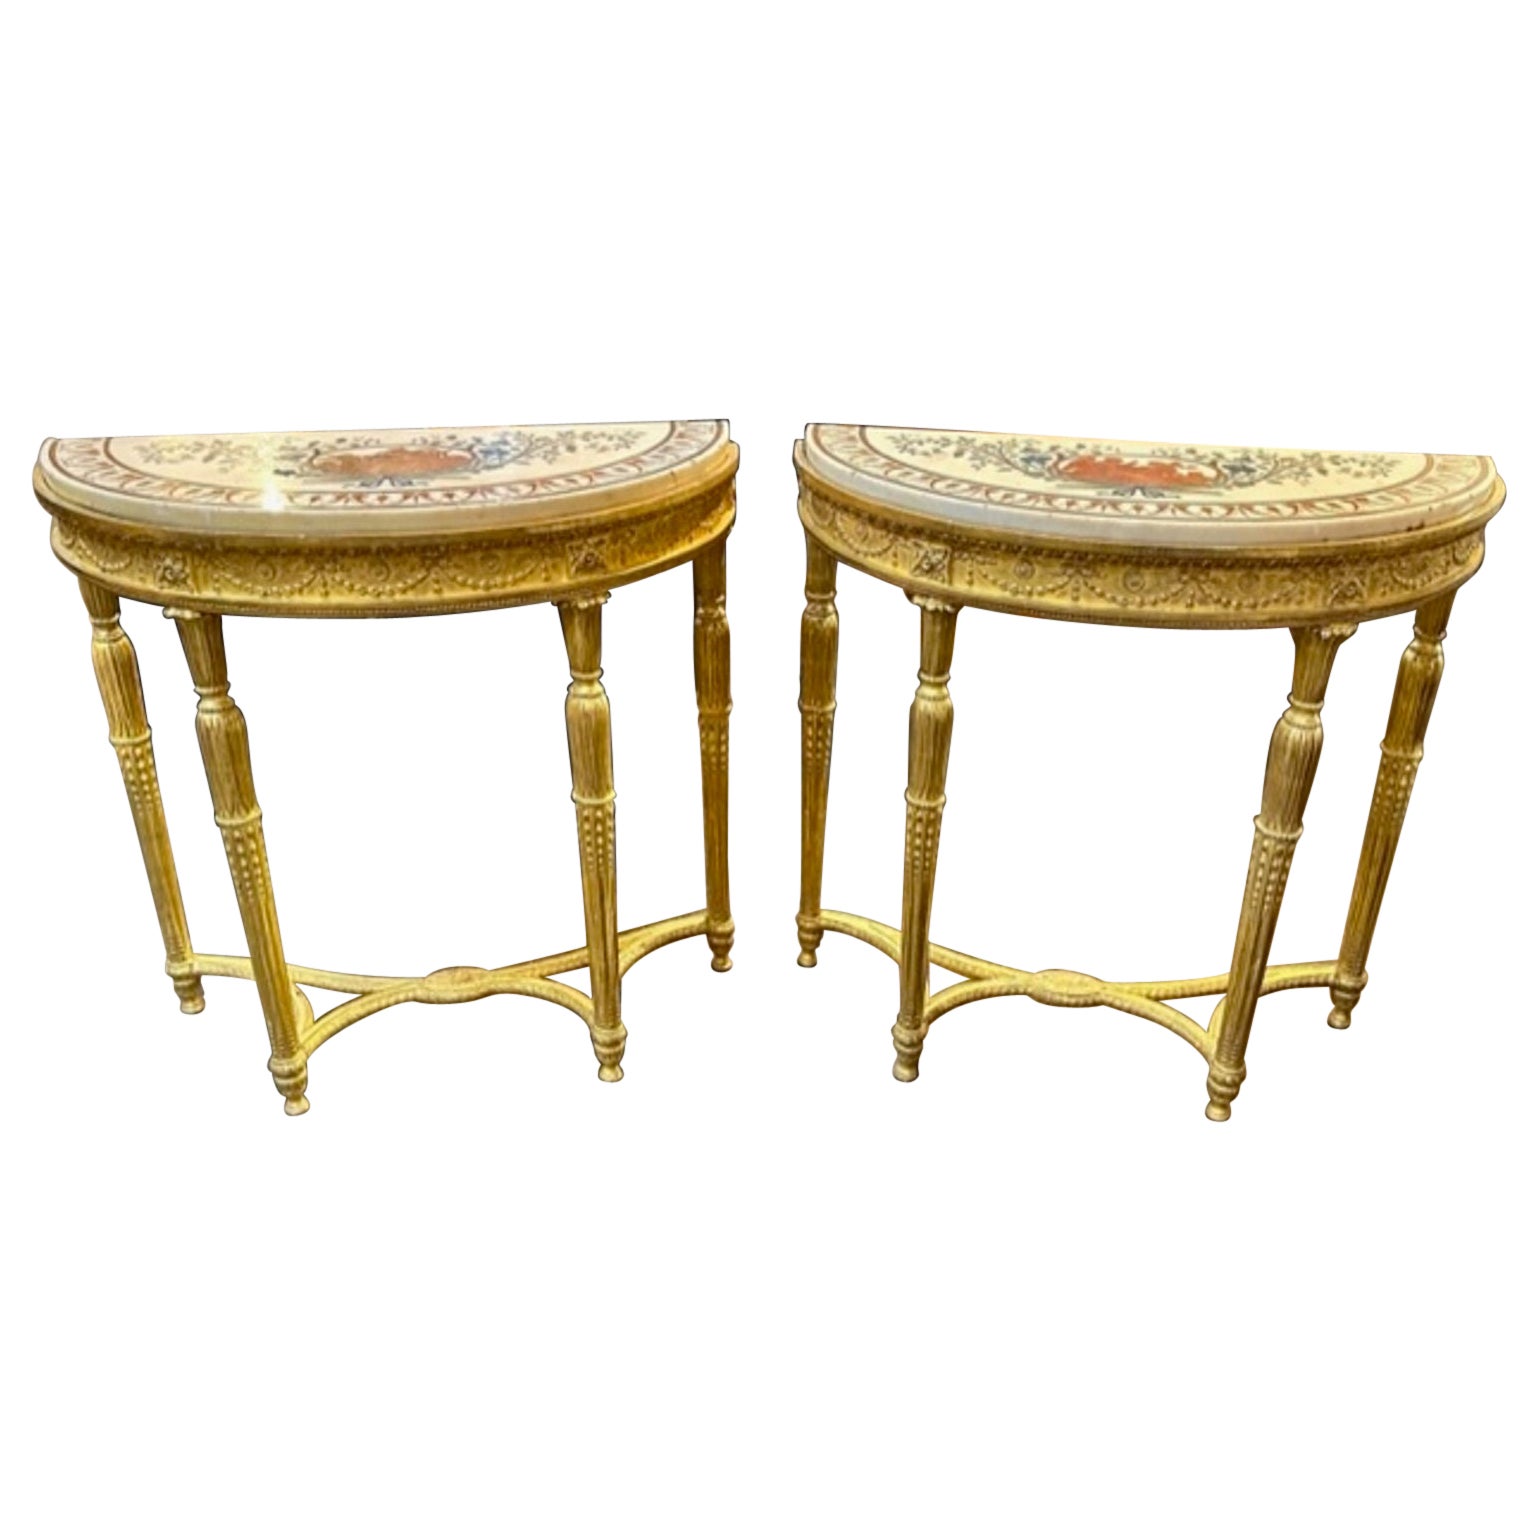 Pair of Rare 18th Century George III Giltwood Consoles with Marble Tops For Sale